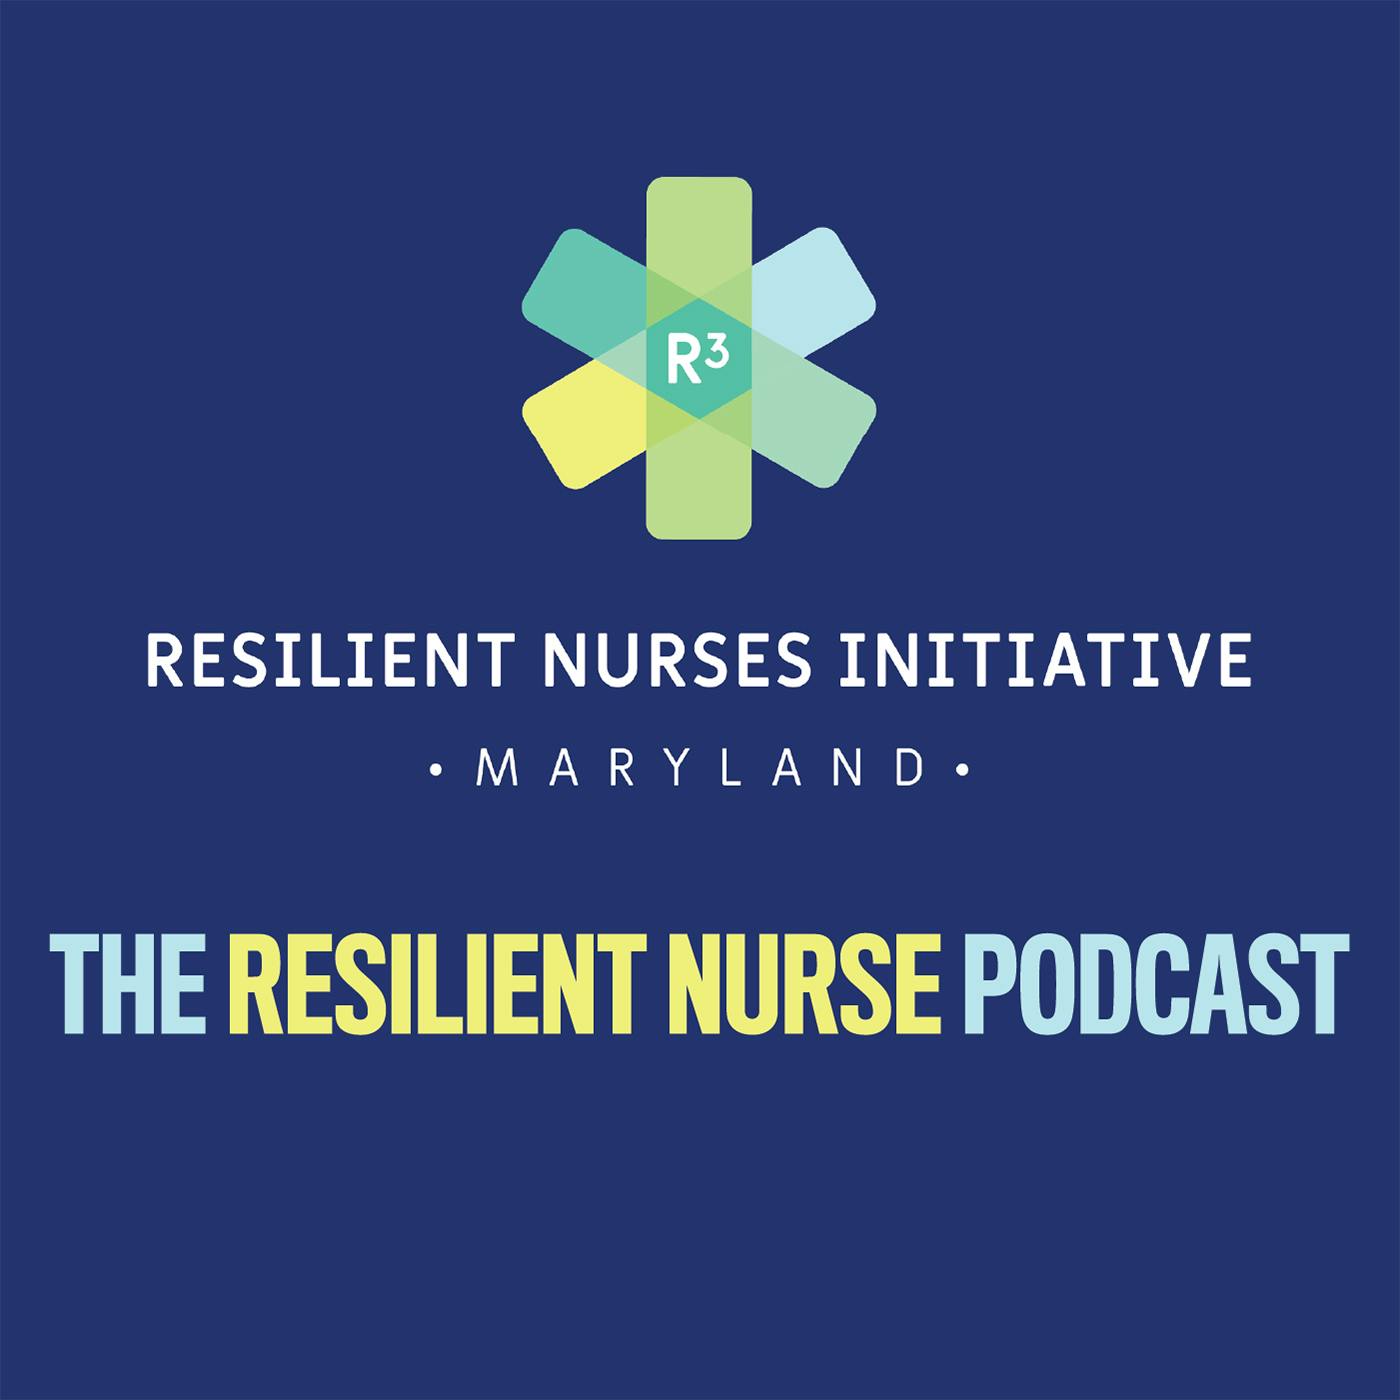 The Resilient Nurse, Episode 8: How to Support Nurses in a Challenging Moment